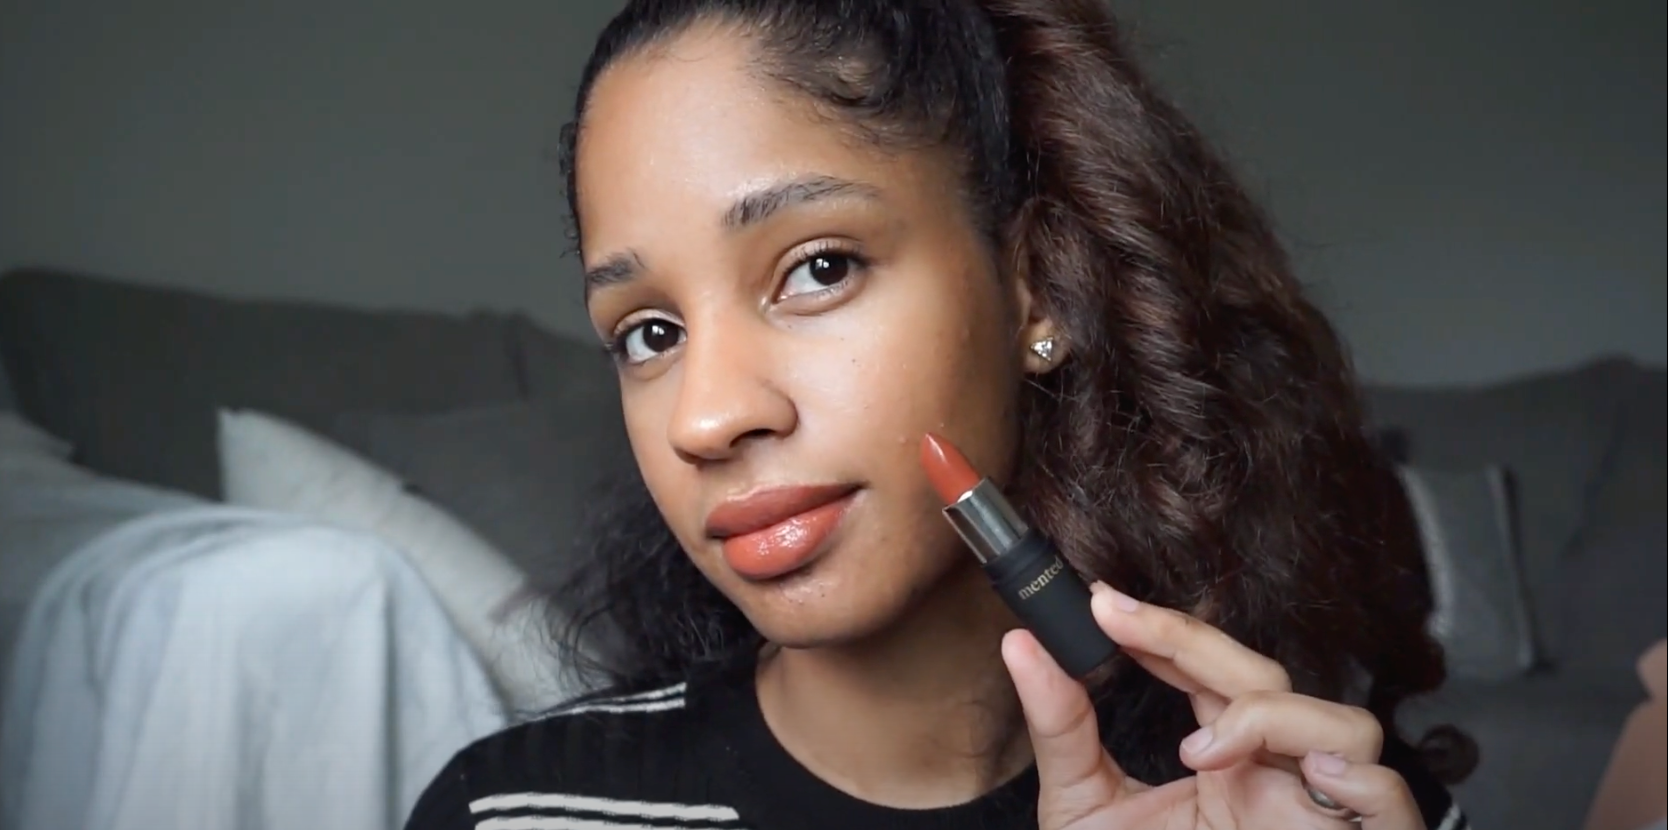 CurlsBeauty Reviews our Holiday Lip Trio